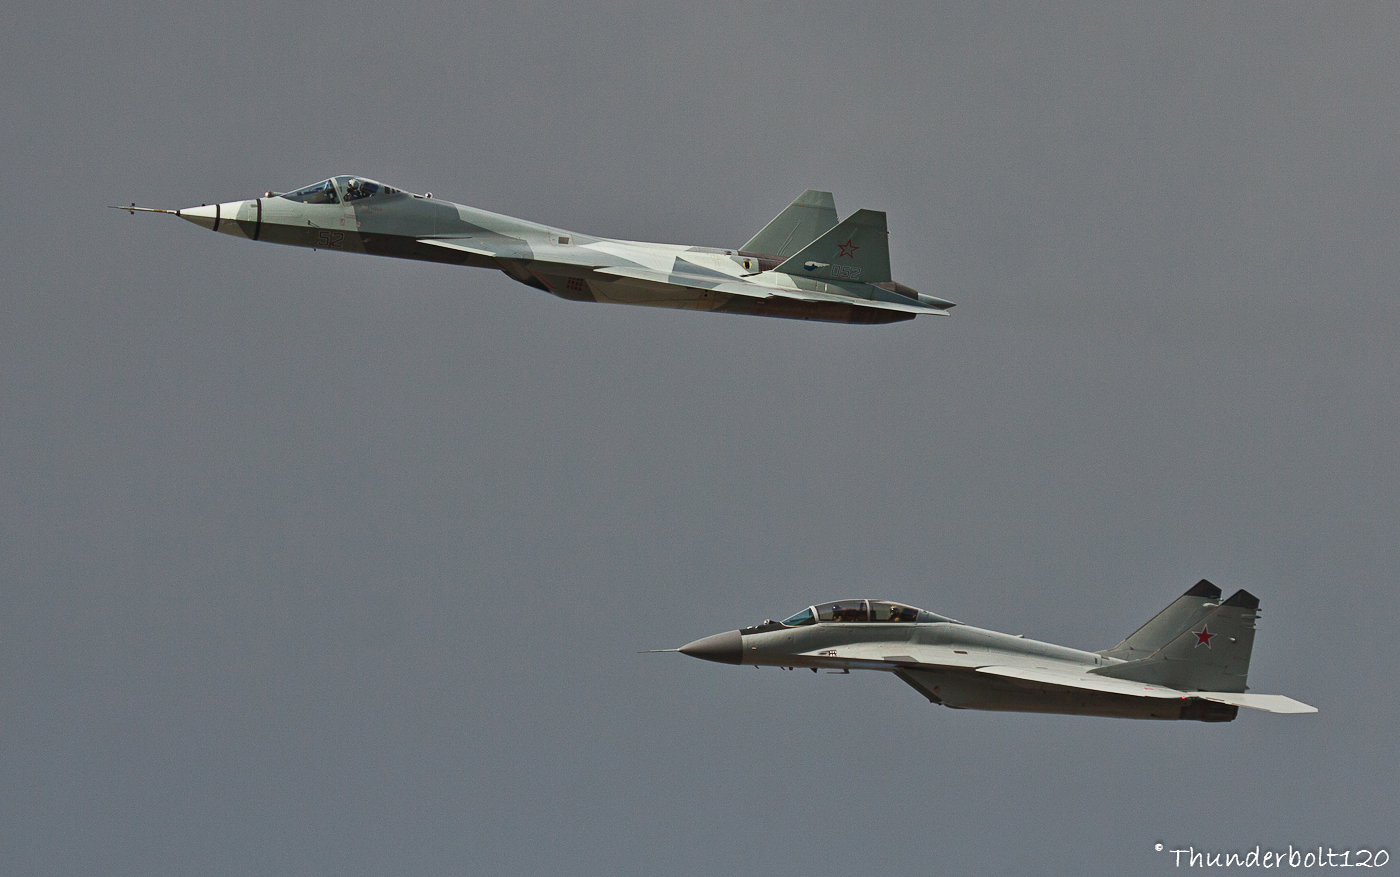 T-50 and Mig-29M2